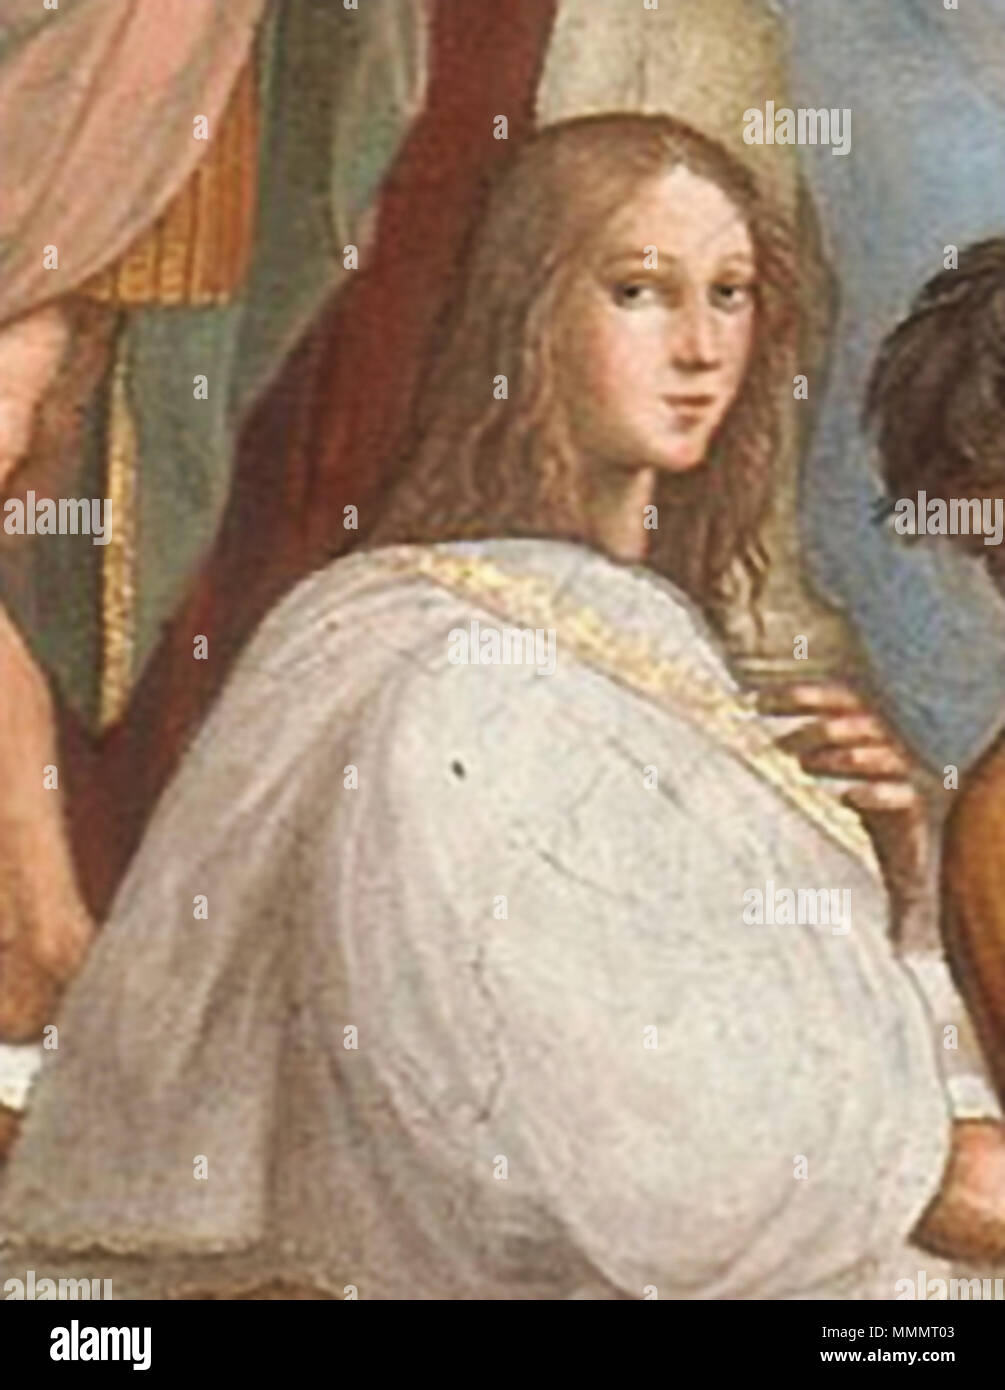 . English: Detail from The School of Athens by Raffaello Sanzio. It may be a portrait of Francesco Maria della Rovere, or possibly the philosopher Pico della Mirandola. Although some modern hypotheses have identified the subject as Hypatia, the consensus of scholars [1] [2] is that the subject is male and that Hypatia was not depicted.  . between 1509 and 1510. Raffaello Santi (Wikipedia) Hypatia Raphael Sanzio detail Stock Photo